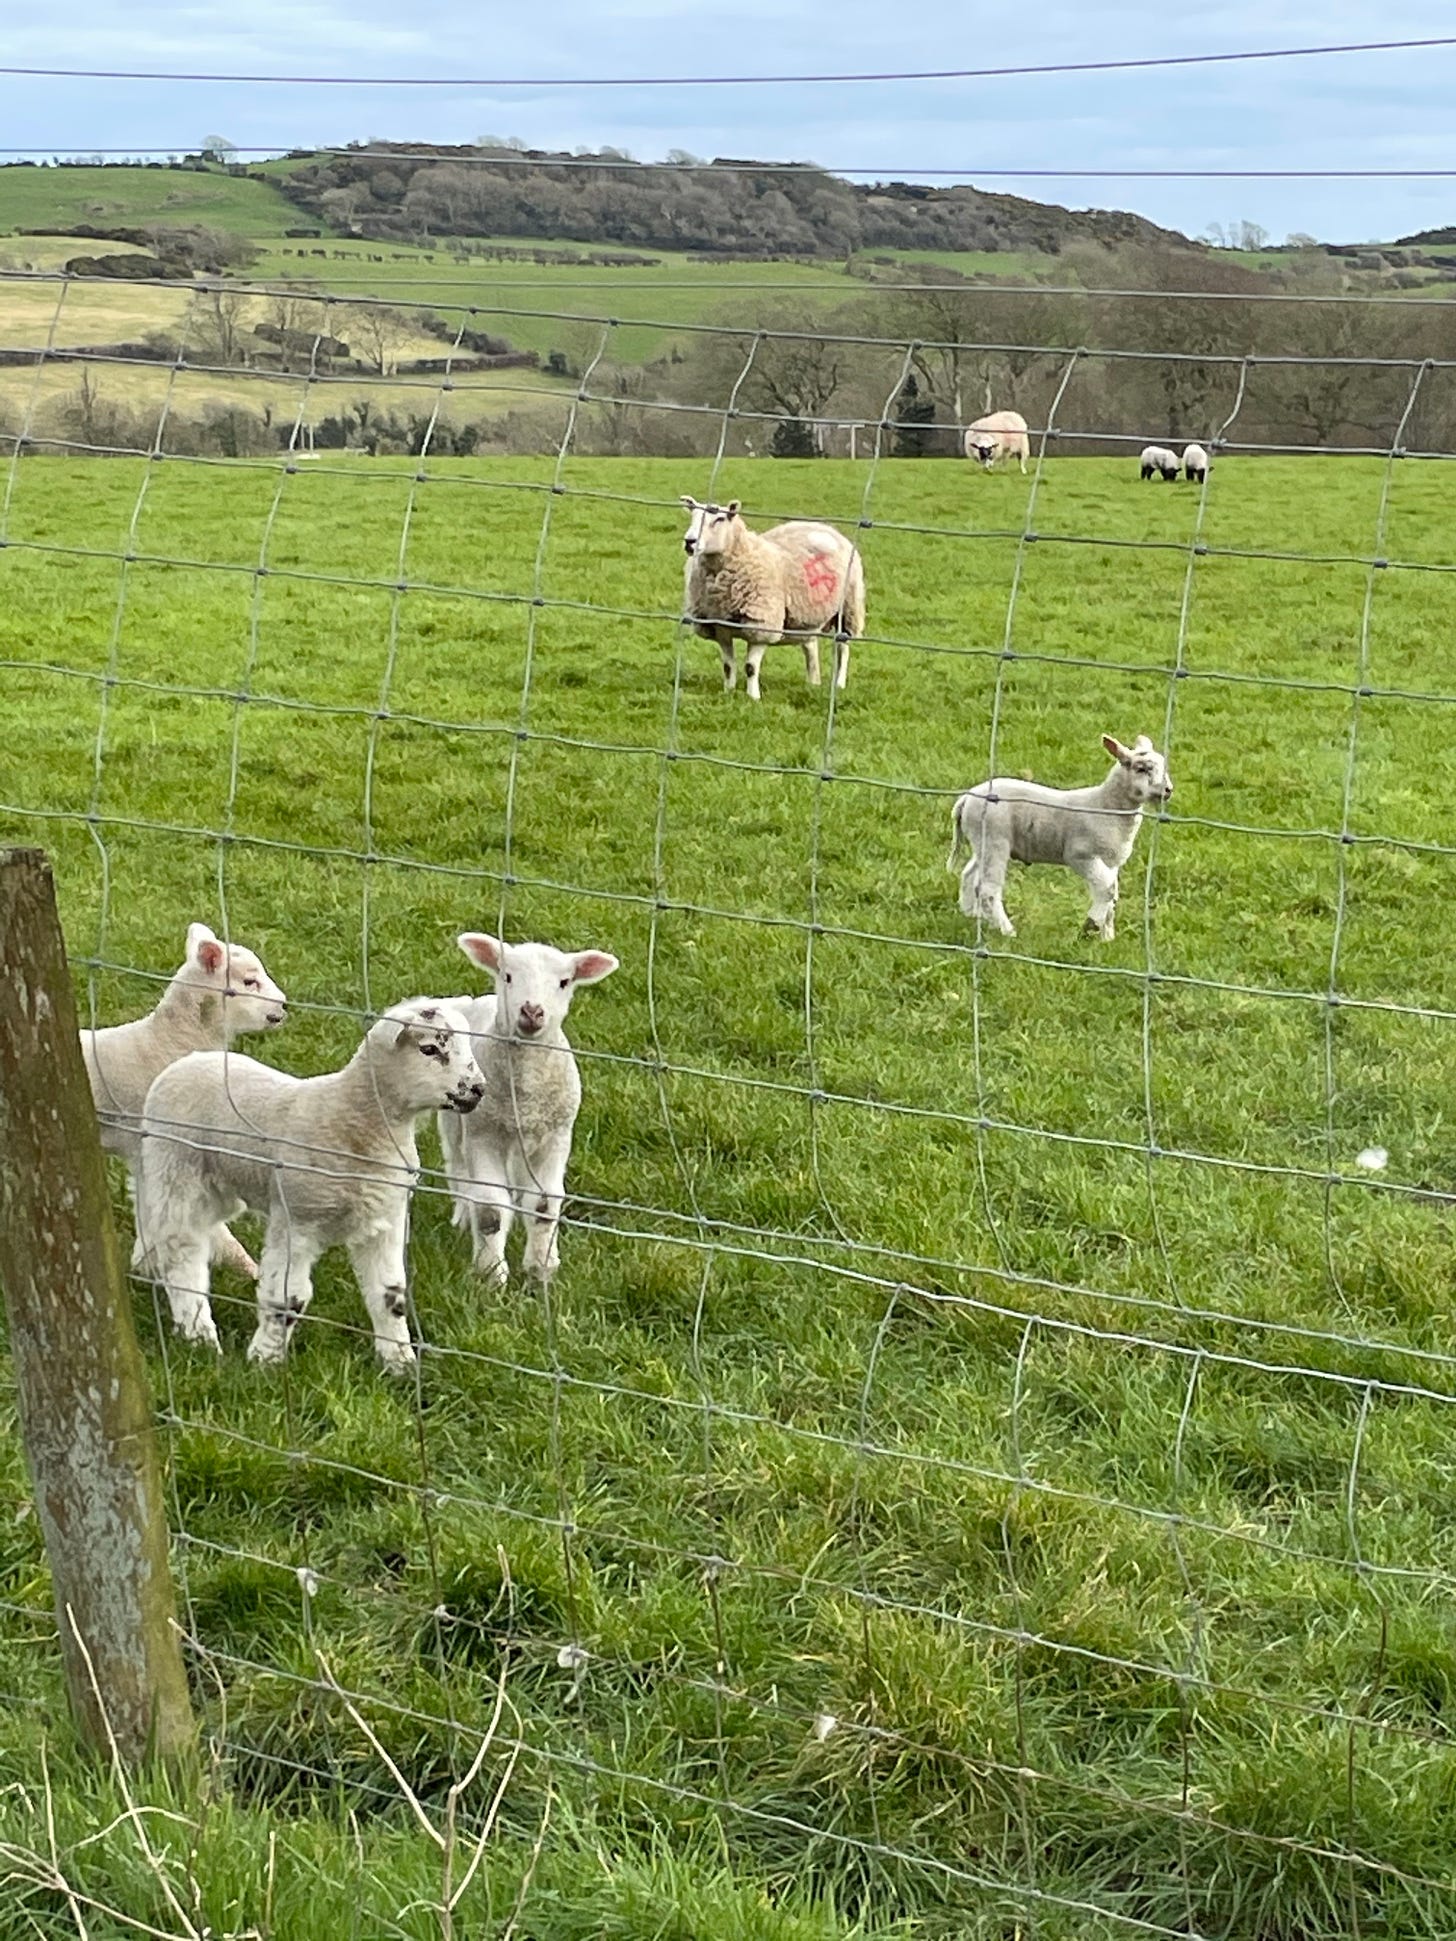 Lambs and sheep on a green field